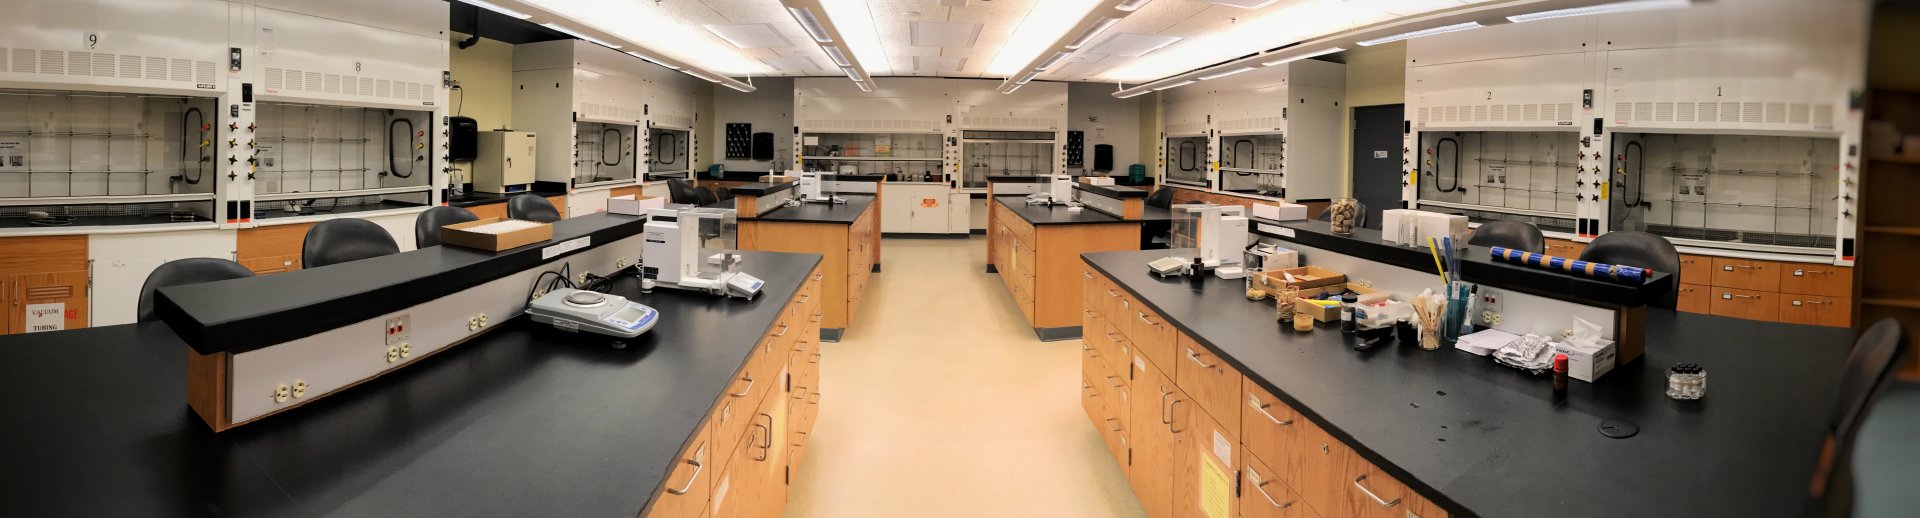 View of the Chemistry Academic Organic Lab